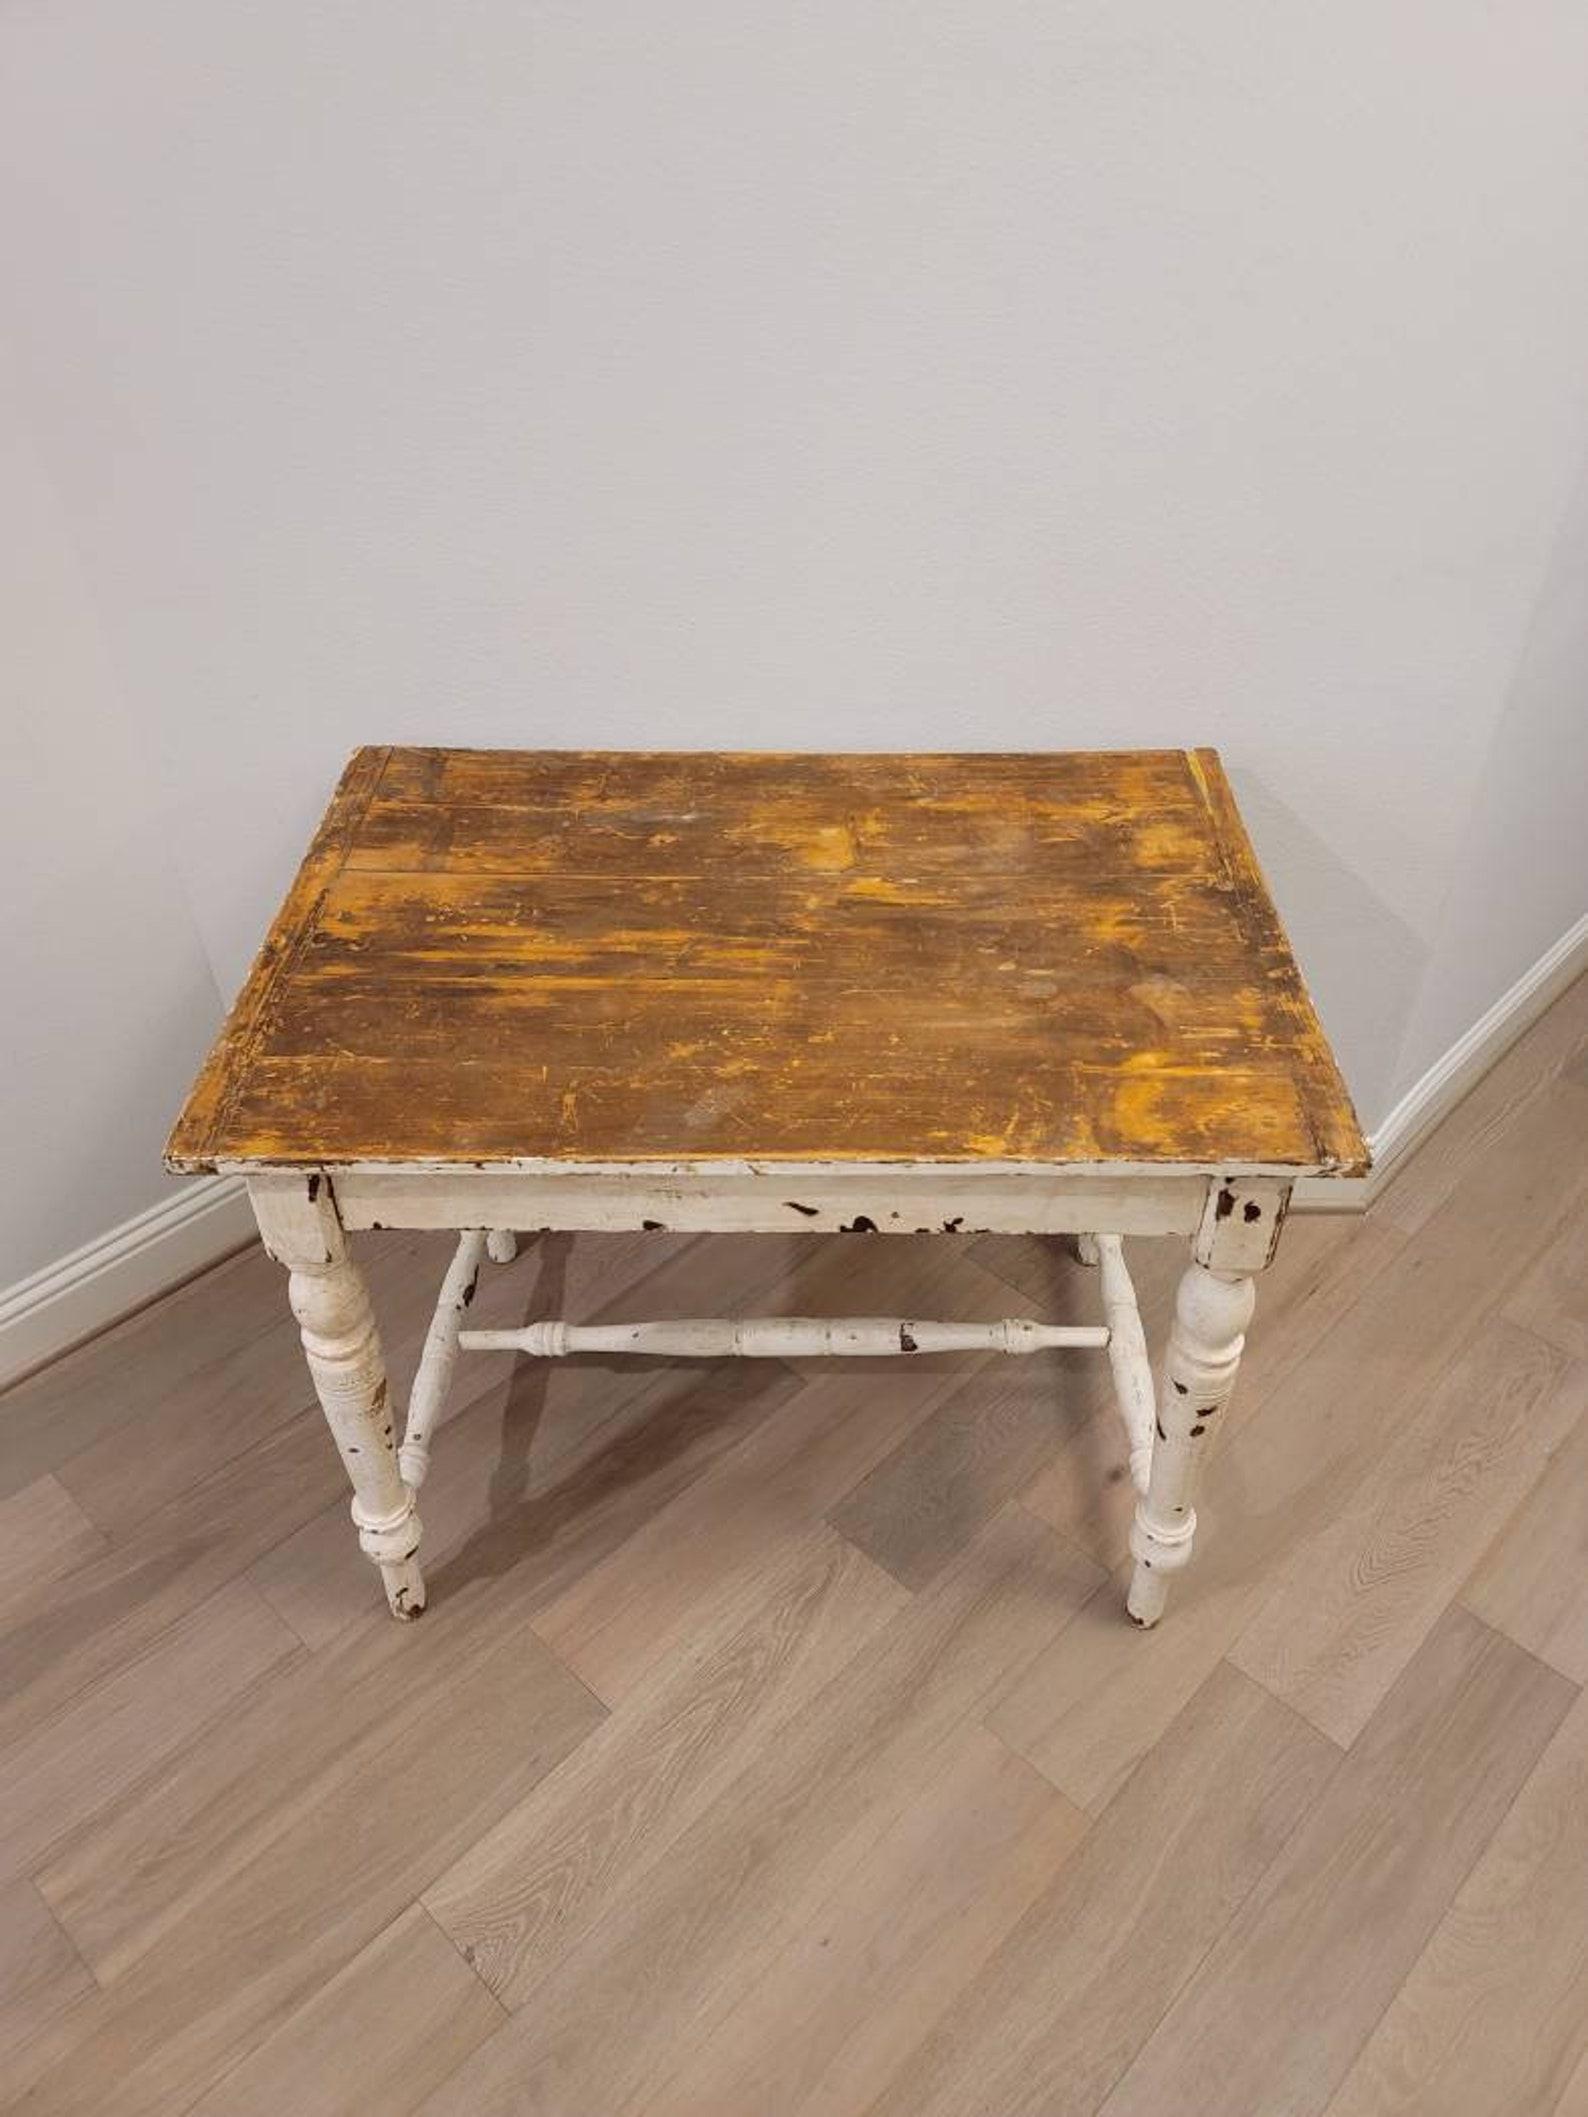 An antique American country farm house painted pine work table. 

Born in Pennsylvania, United States in the late 19th to early 20th century, simple hand-crafted solid wooden construction, having a cleated plank boarded rectangular top with